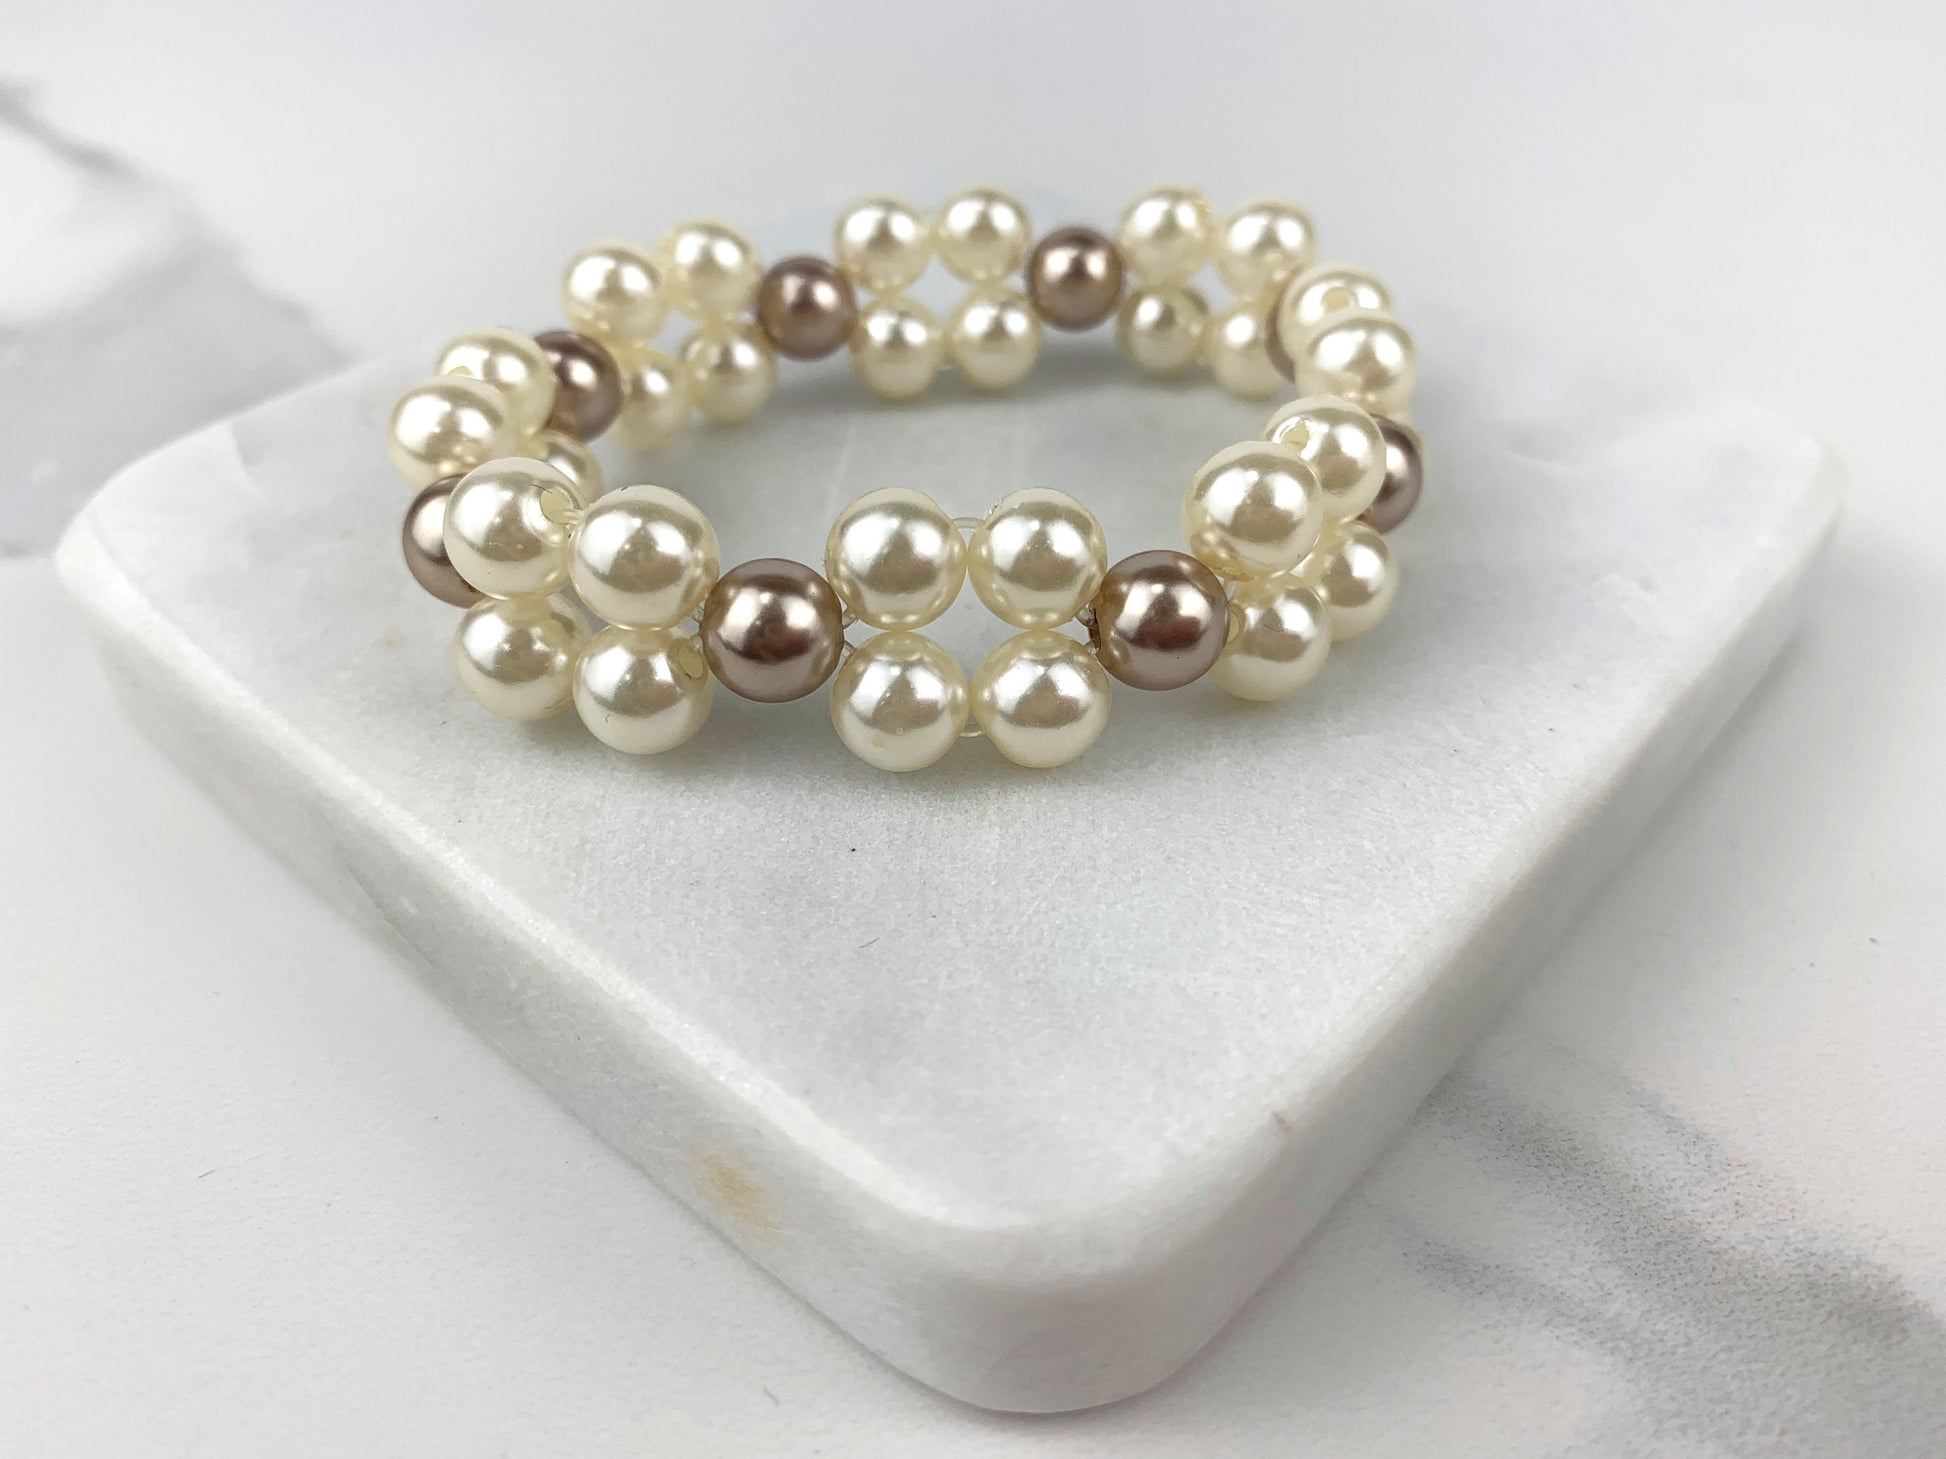 18k Gold Filled White And Pink Pearls Bracelet Wholesale Jewelry Supplies